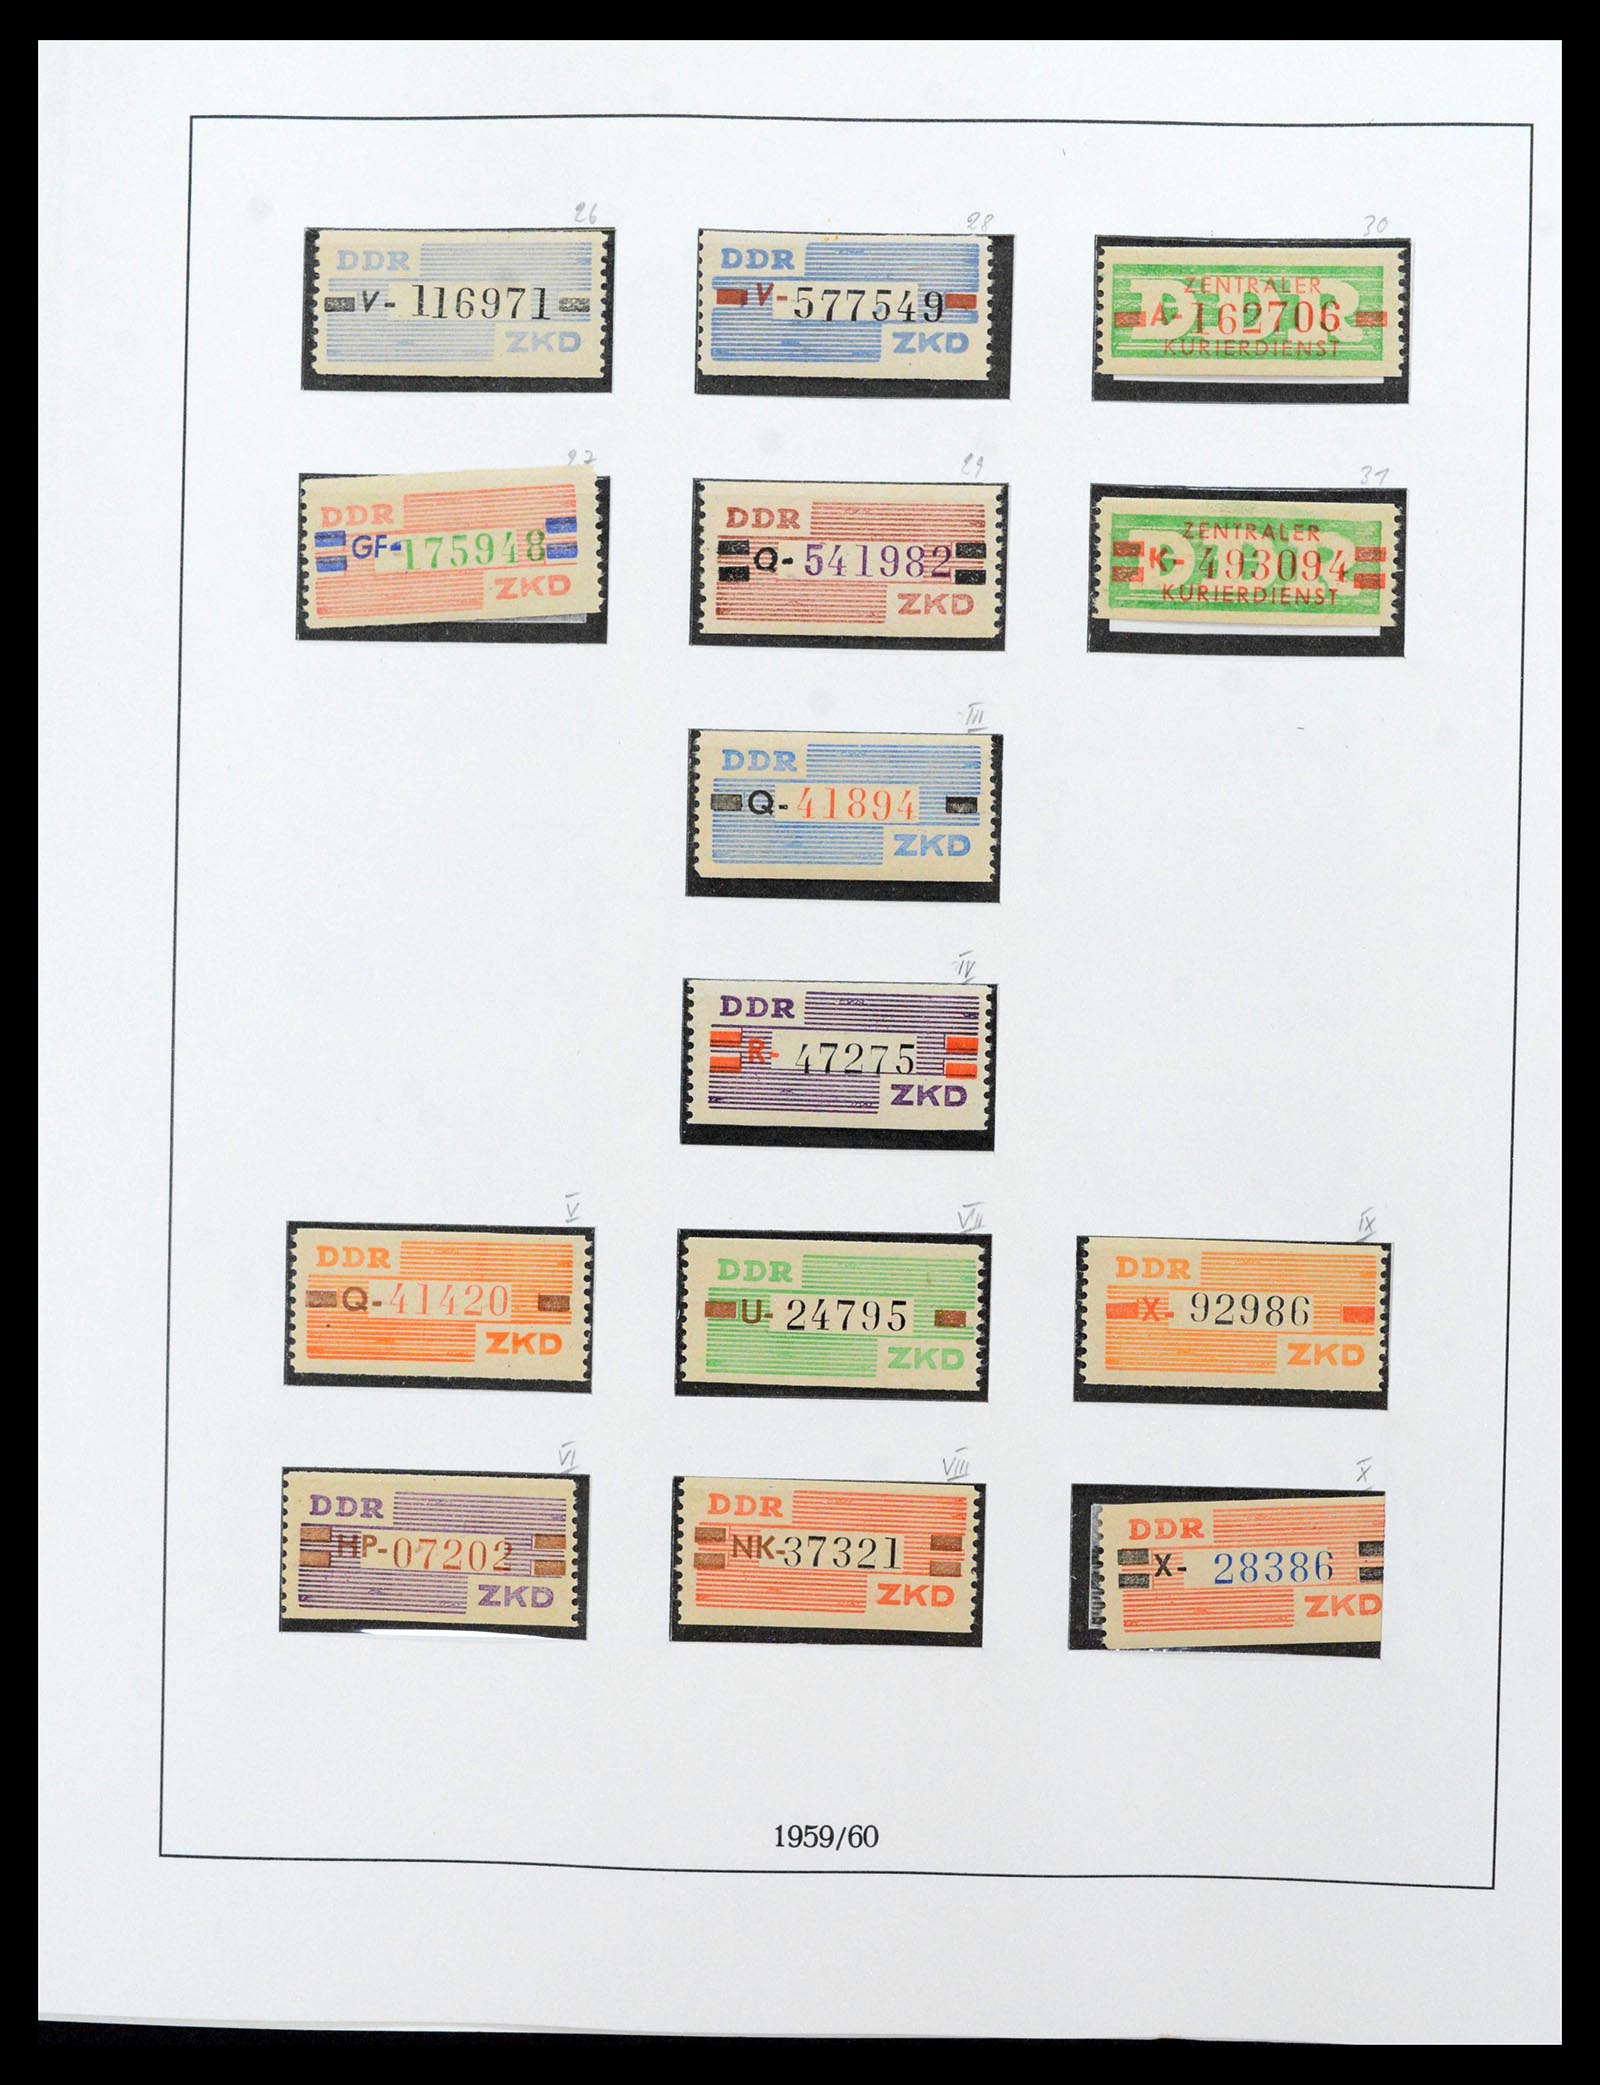 39376 0006 - Stamp collection 39376 GDR service stamps 1951-1965.